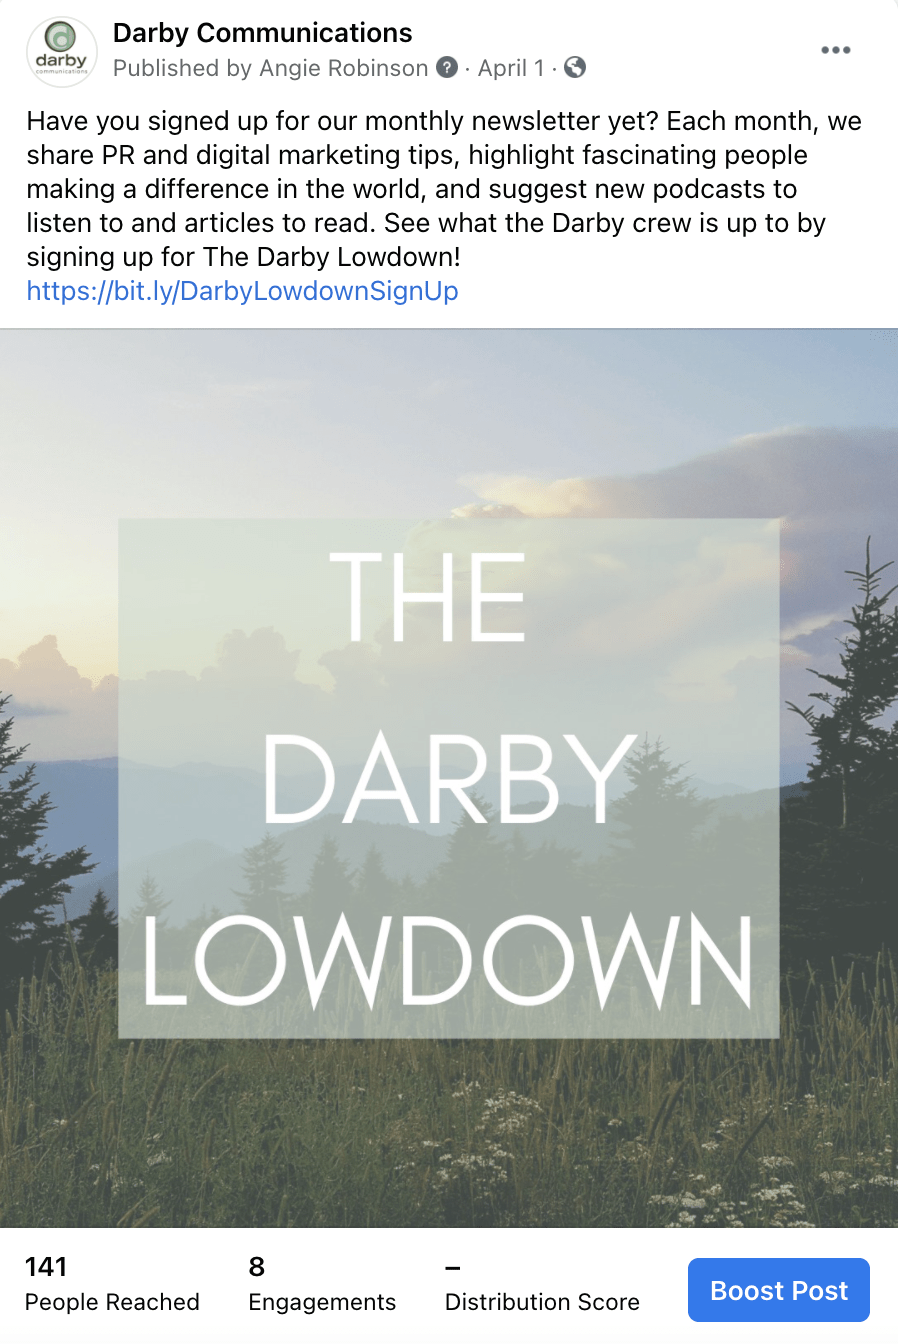 Screenshot of a Facebook post asking visitors to sign up for a newsletter called The Darby Lowdown.